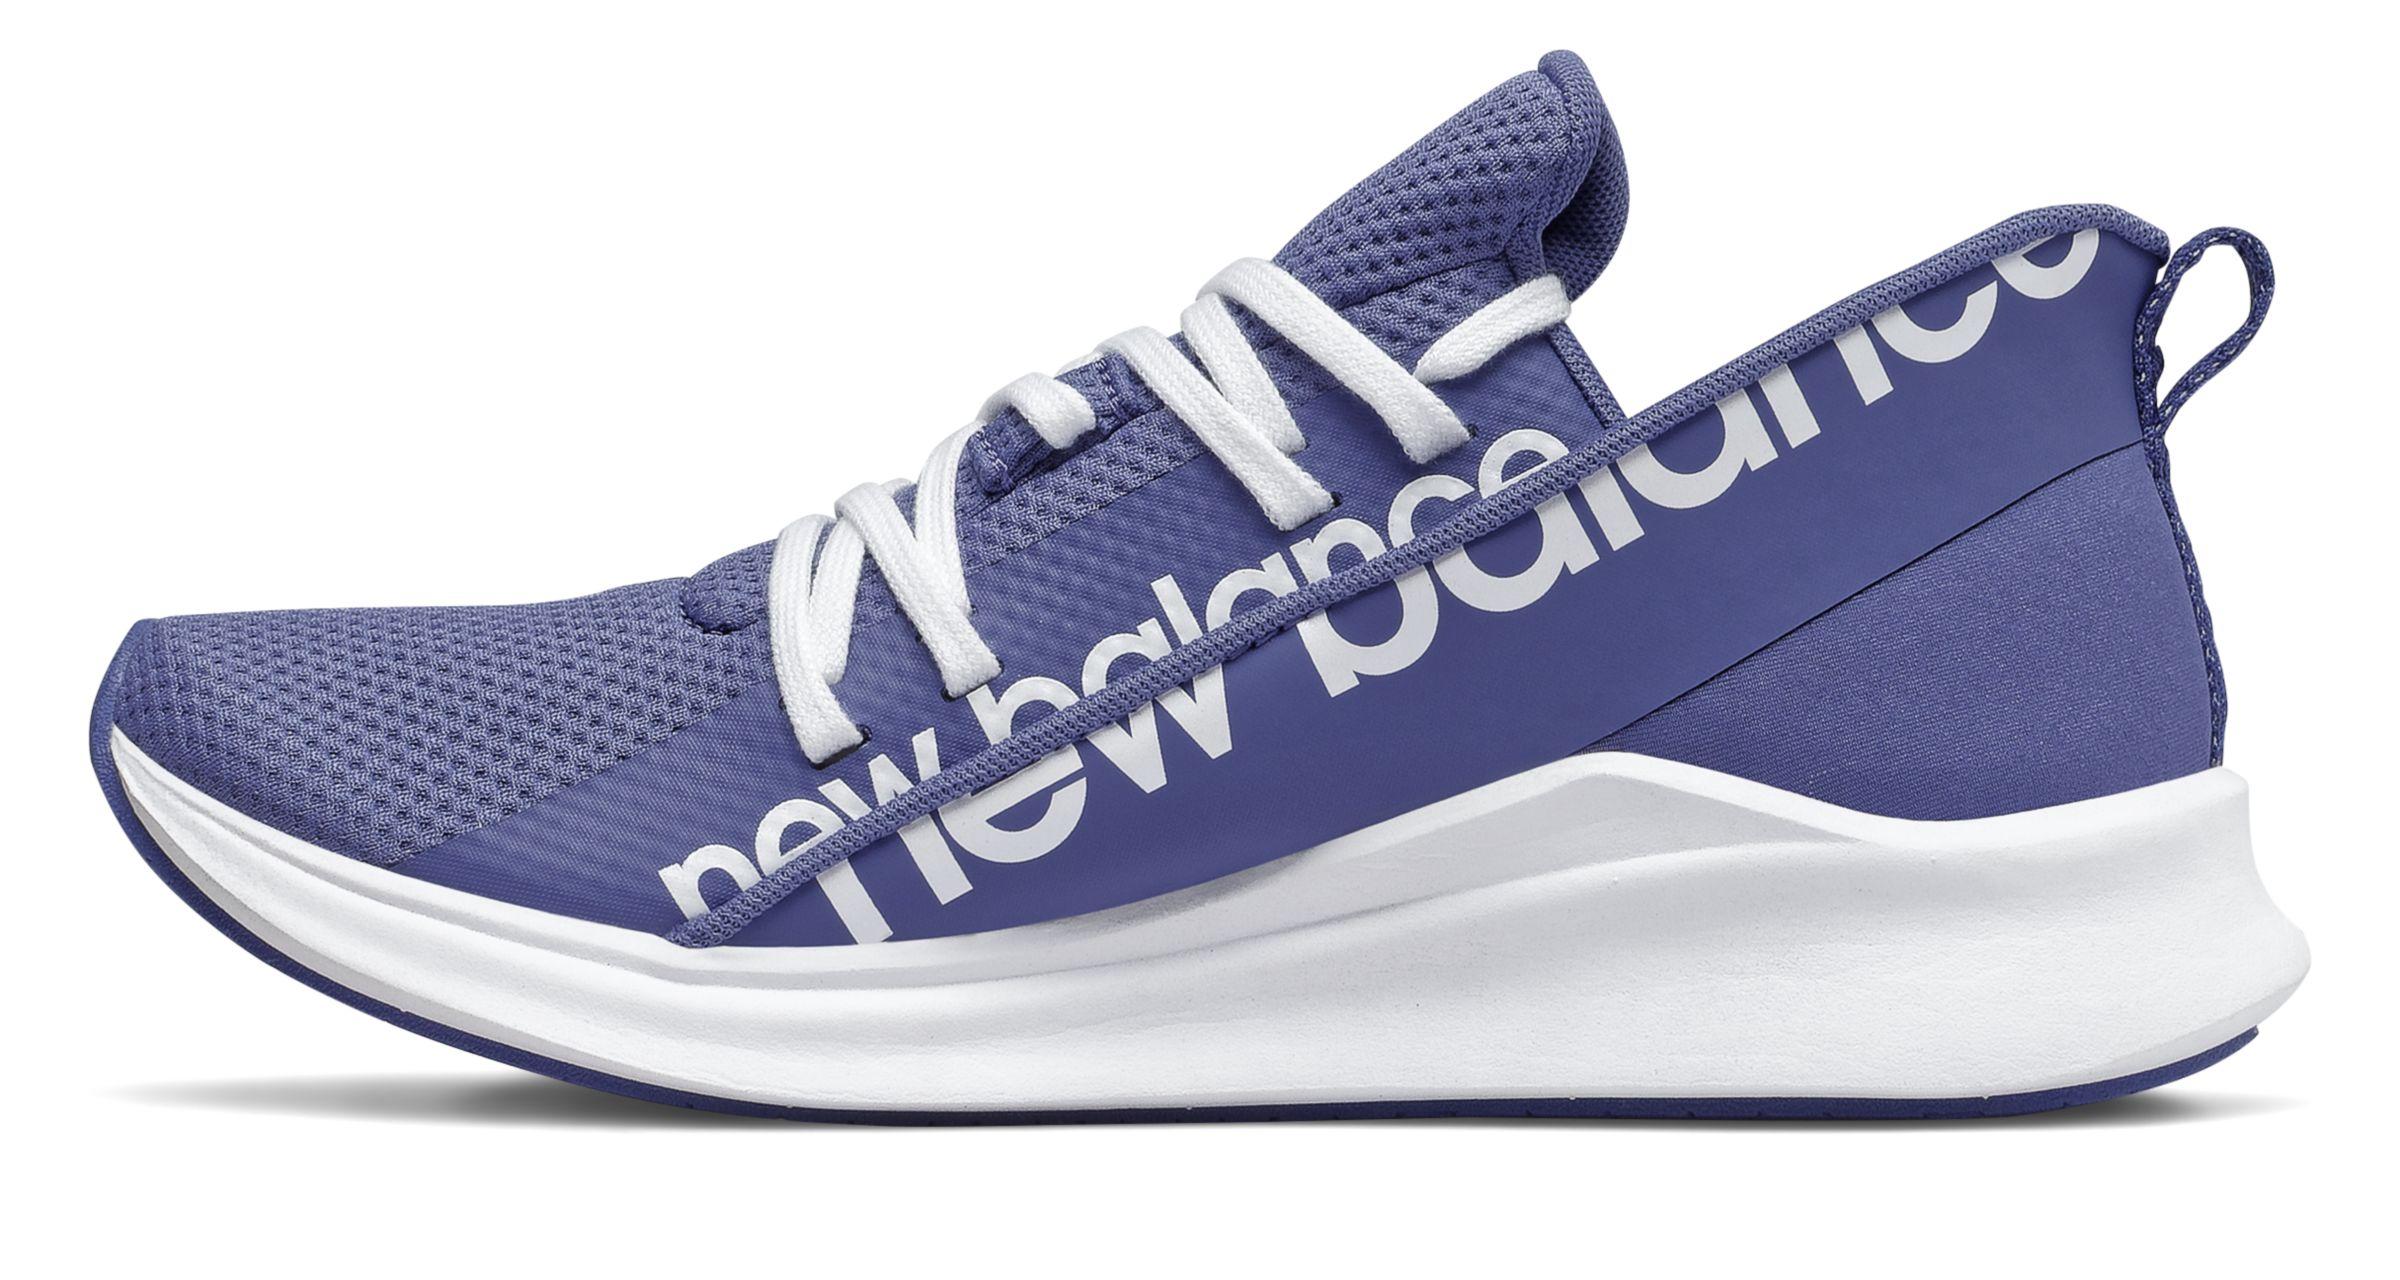 New Balance Powher Run Sport Style Shoes in Blue/White (Blue) - Lyst